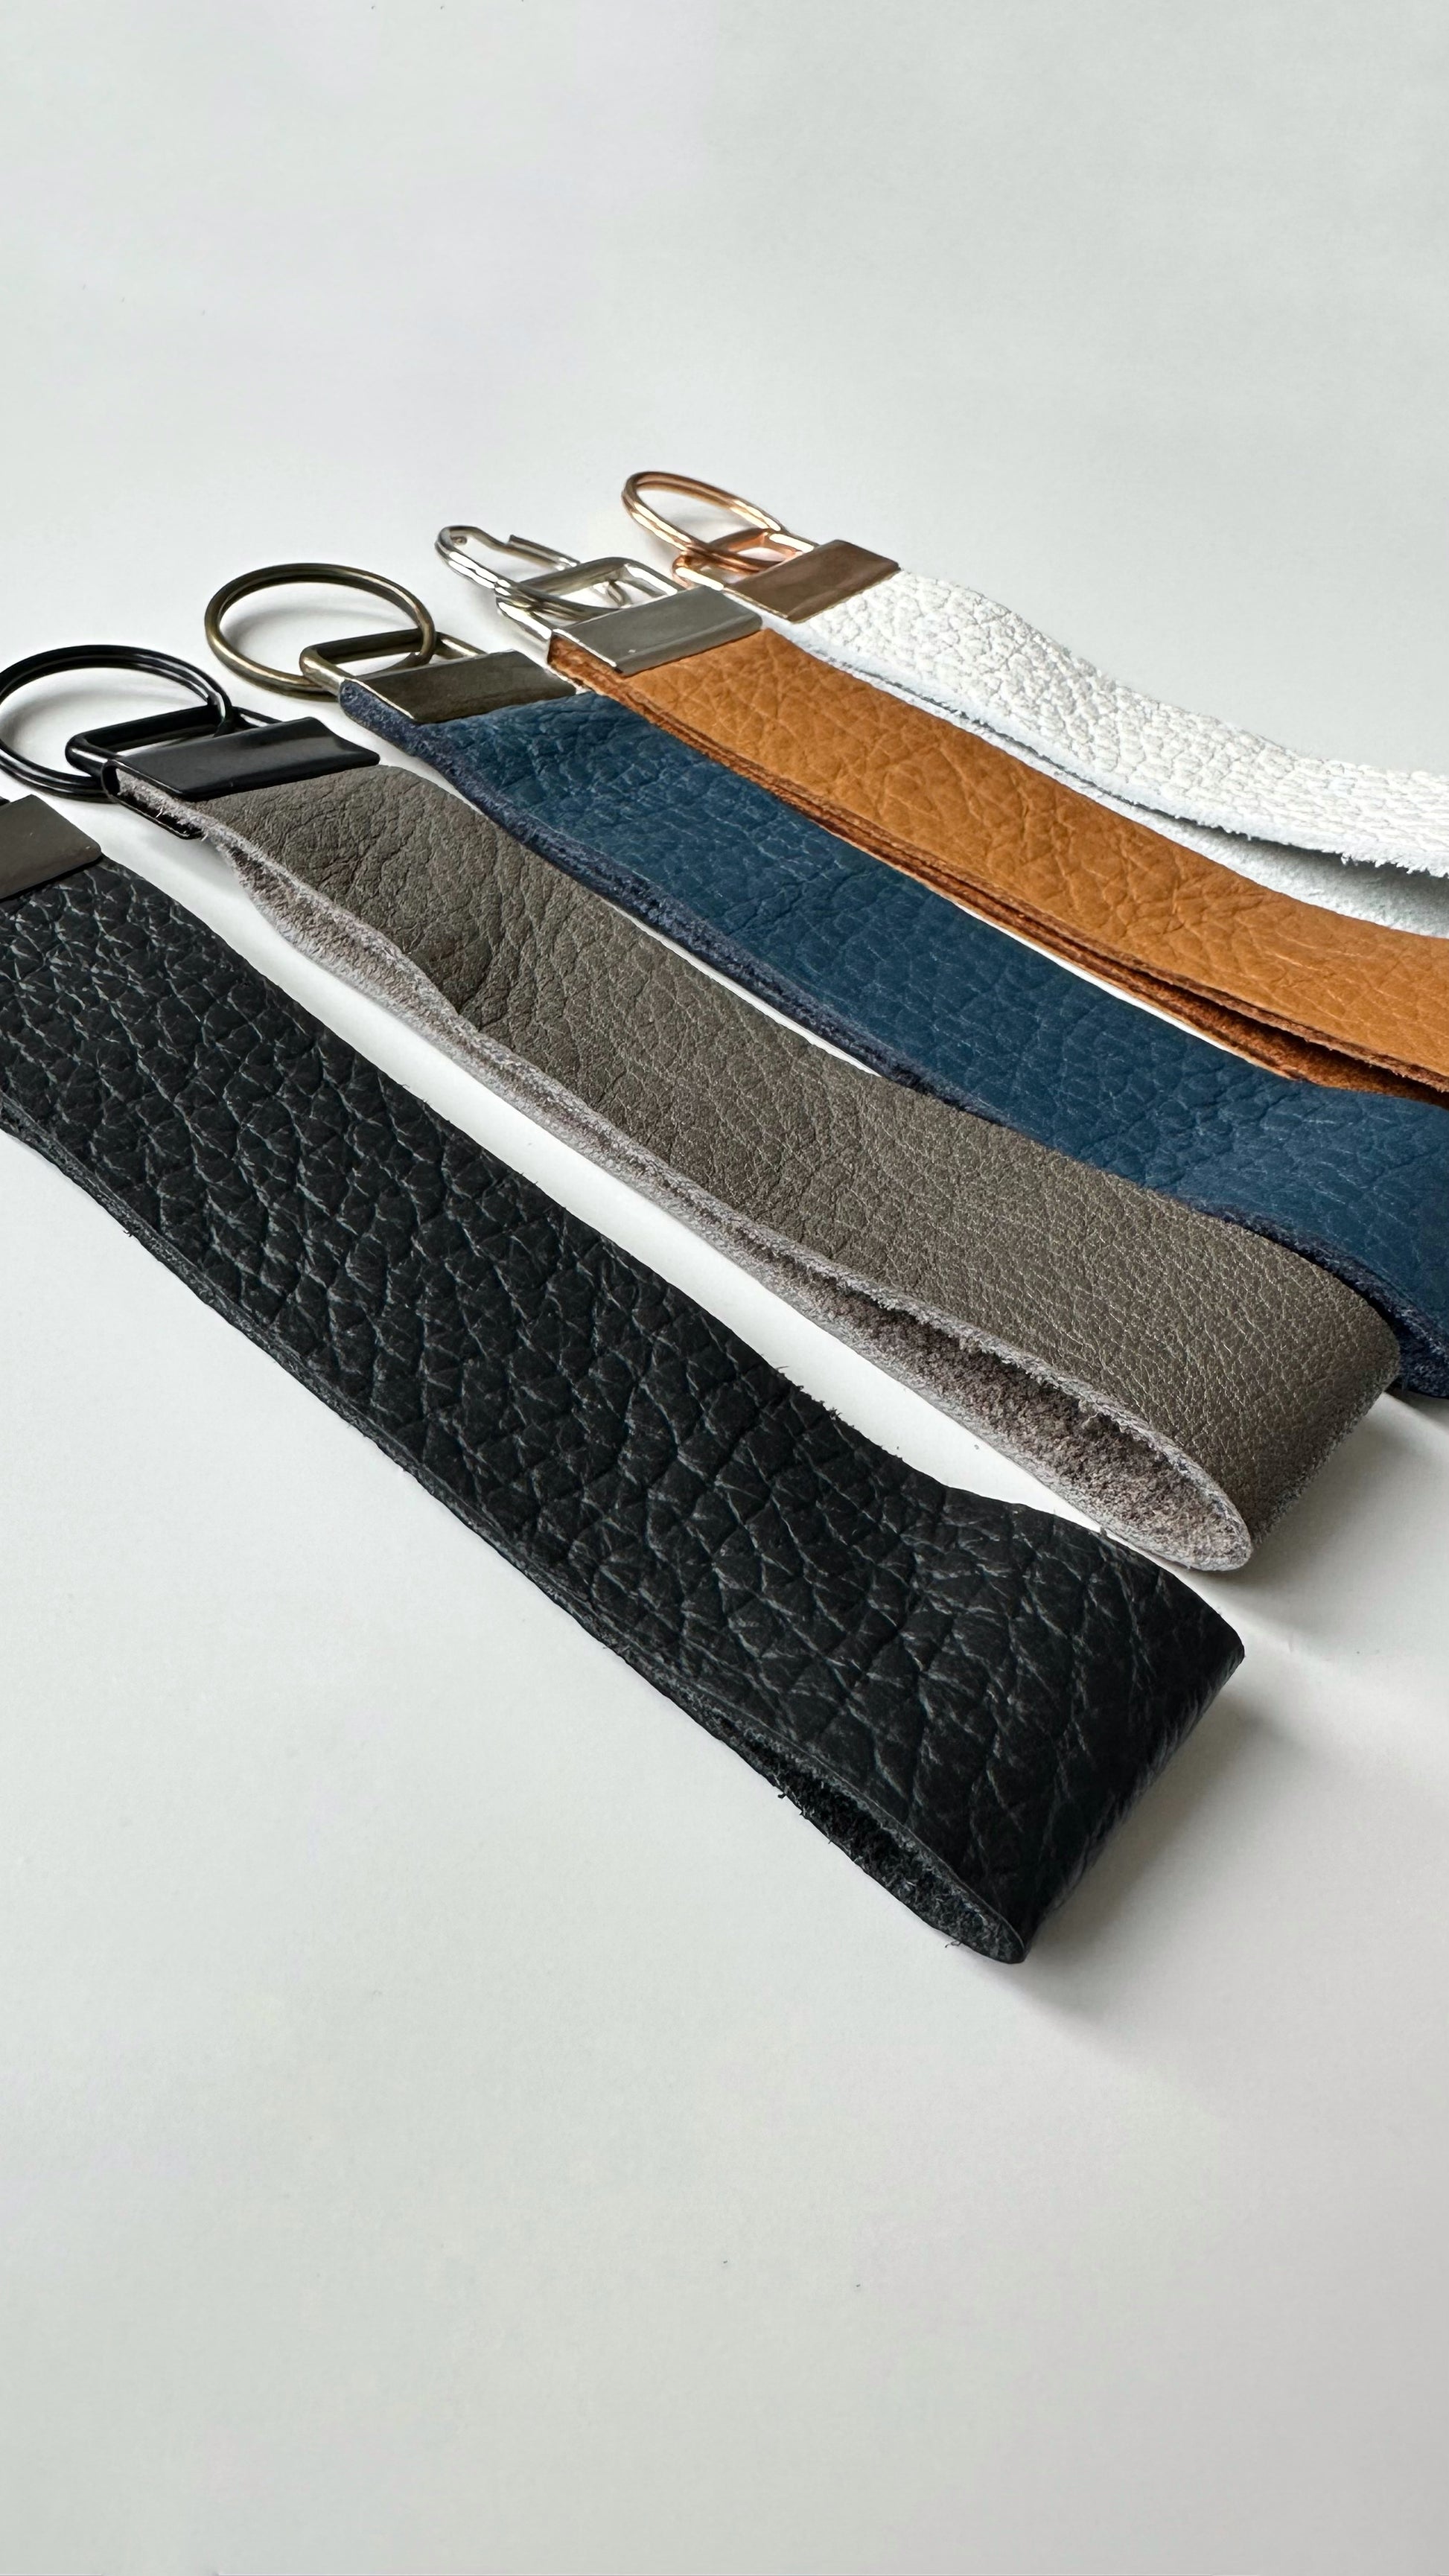 Genuine leather ketchain wristlets in multiple colors. Navy blue, black, tan, gray, and white.